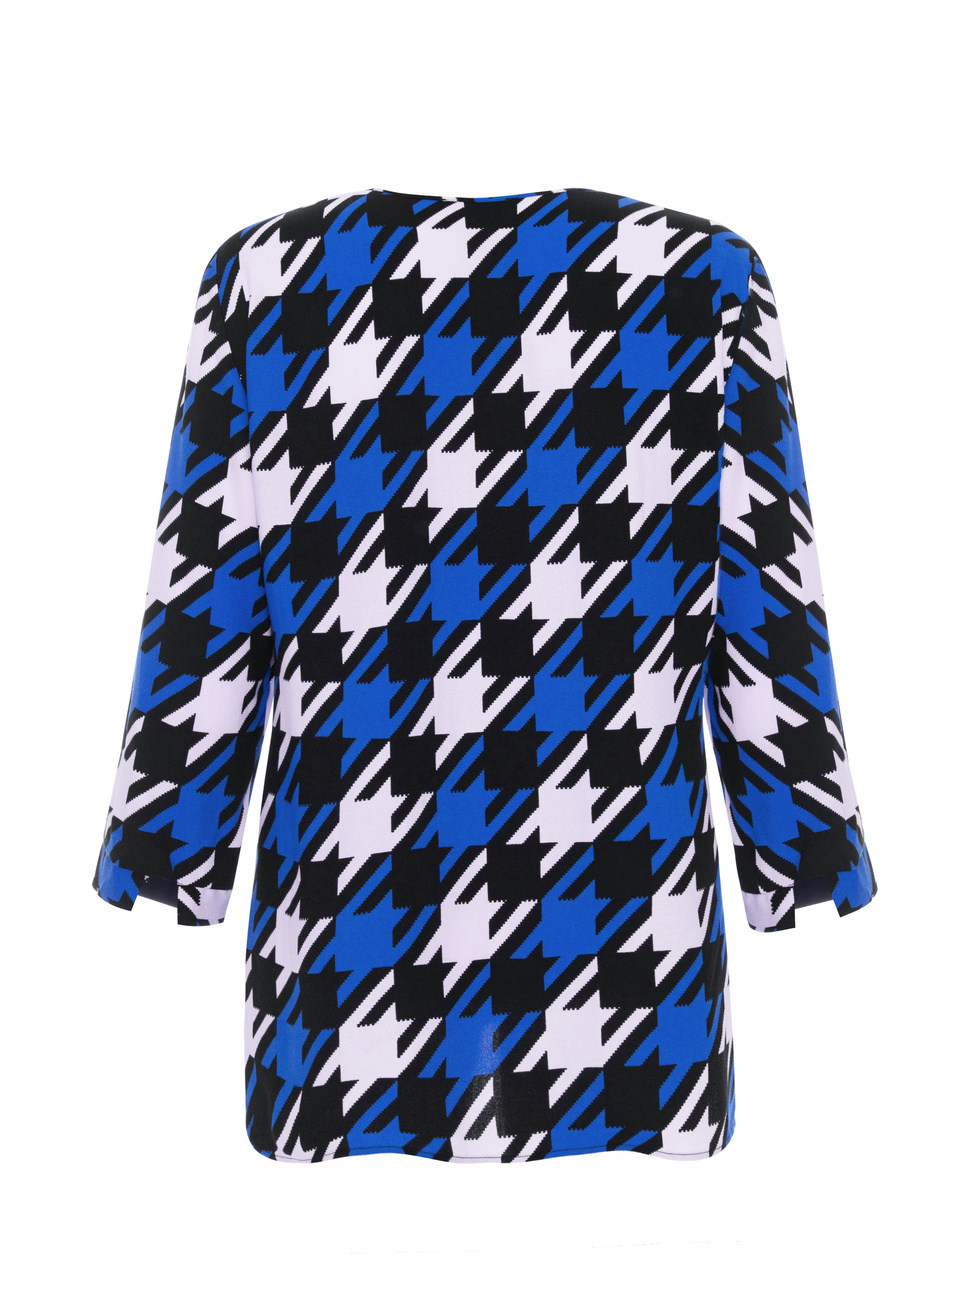 Houndstooth-pattern blouse